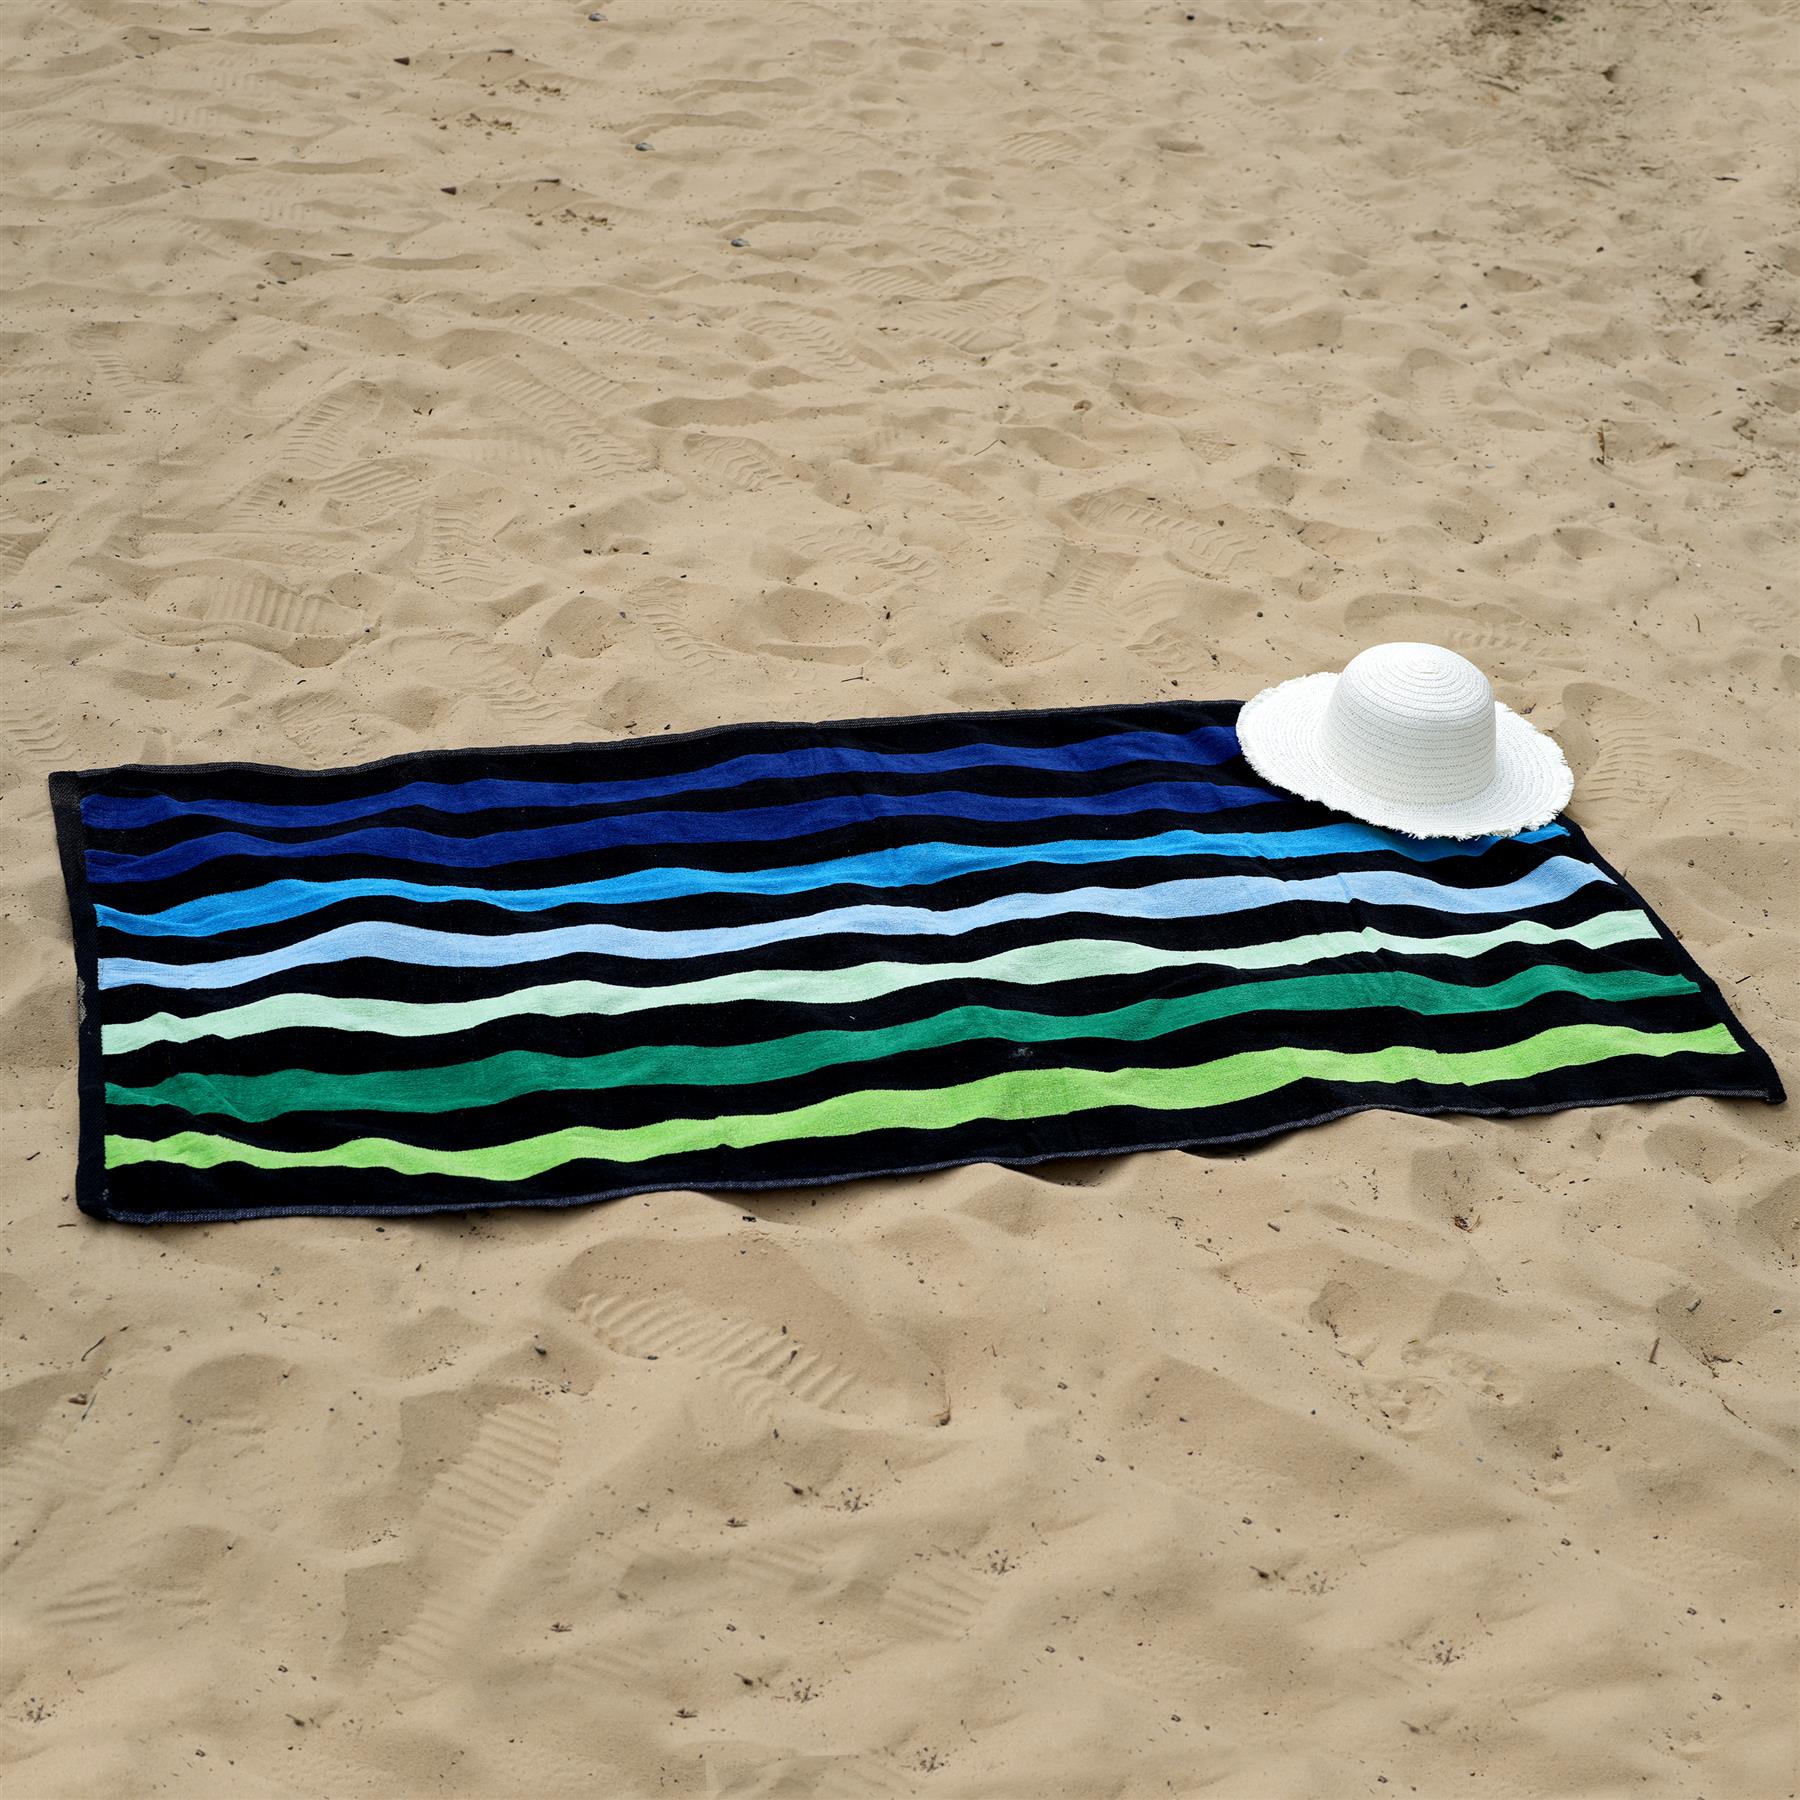 Large Velour Striped Beach Towel (Blue Oasis) by Geezy - UKBuyZone